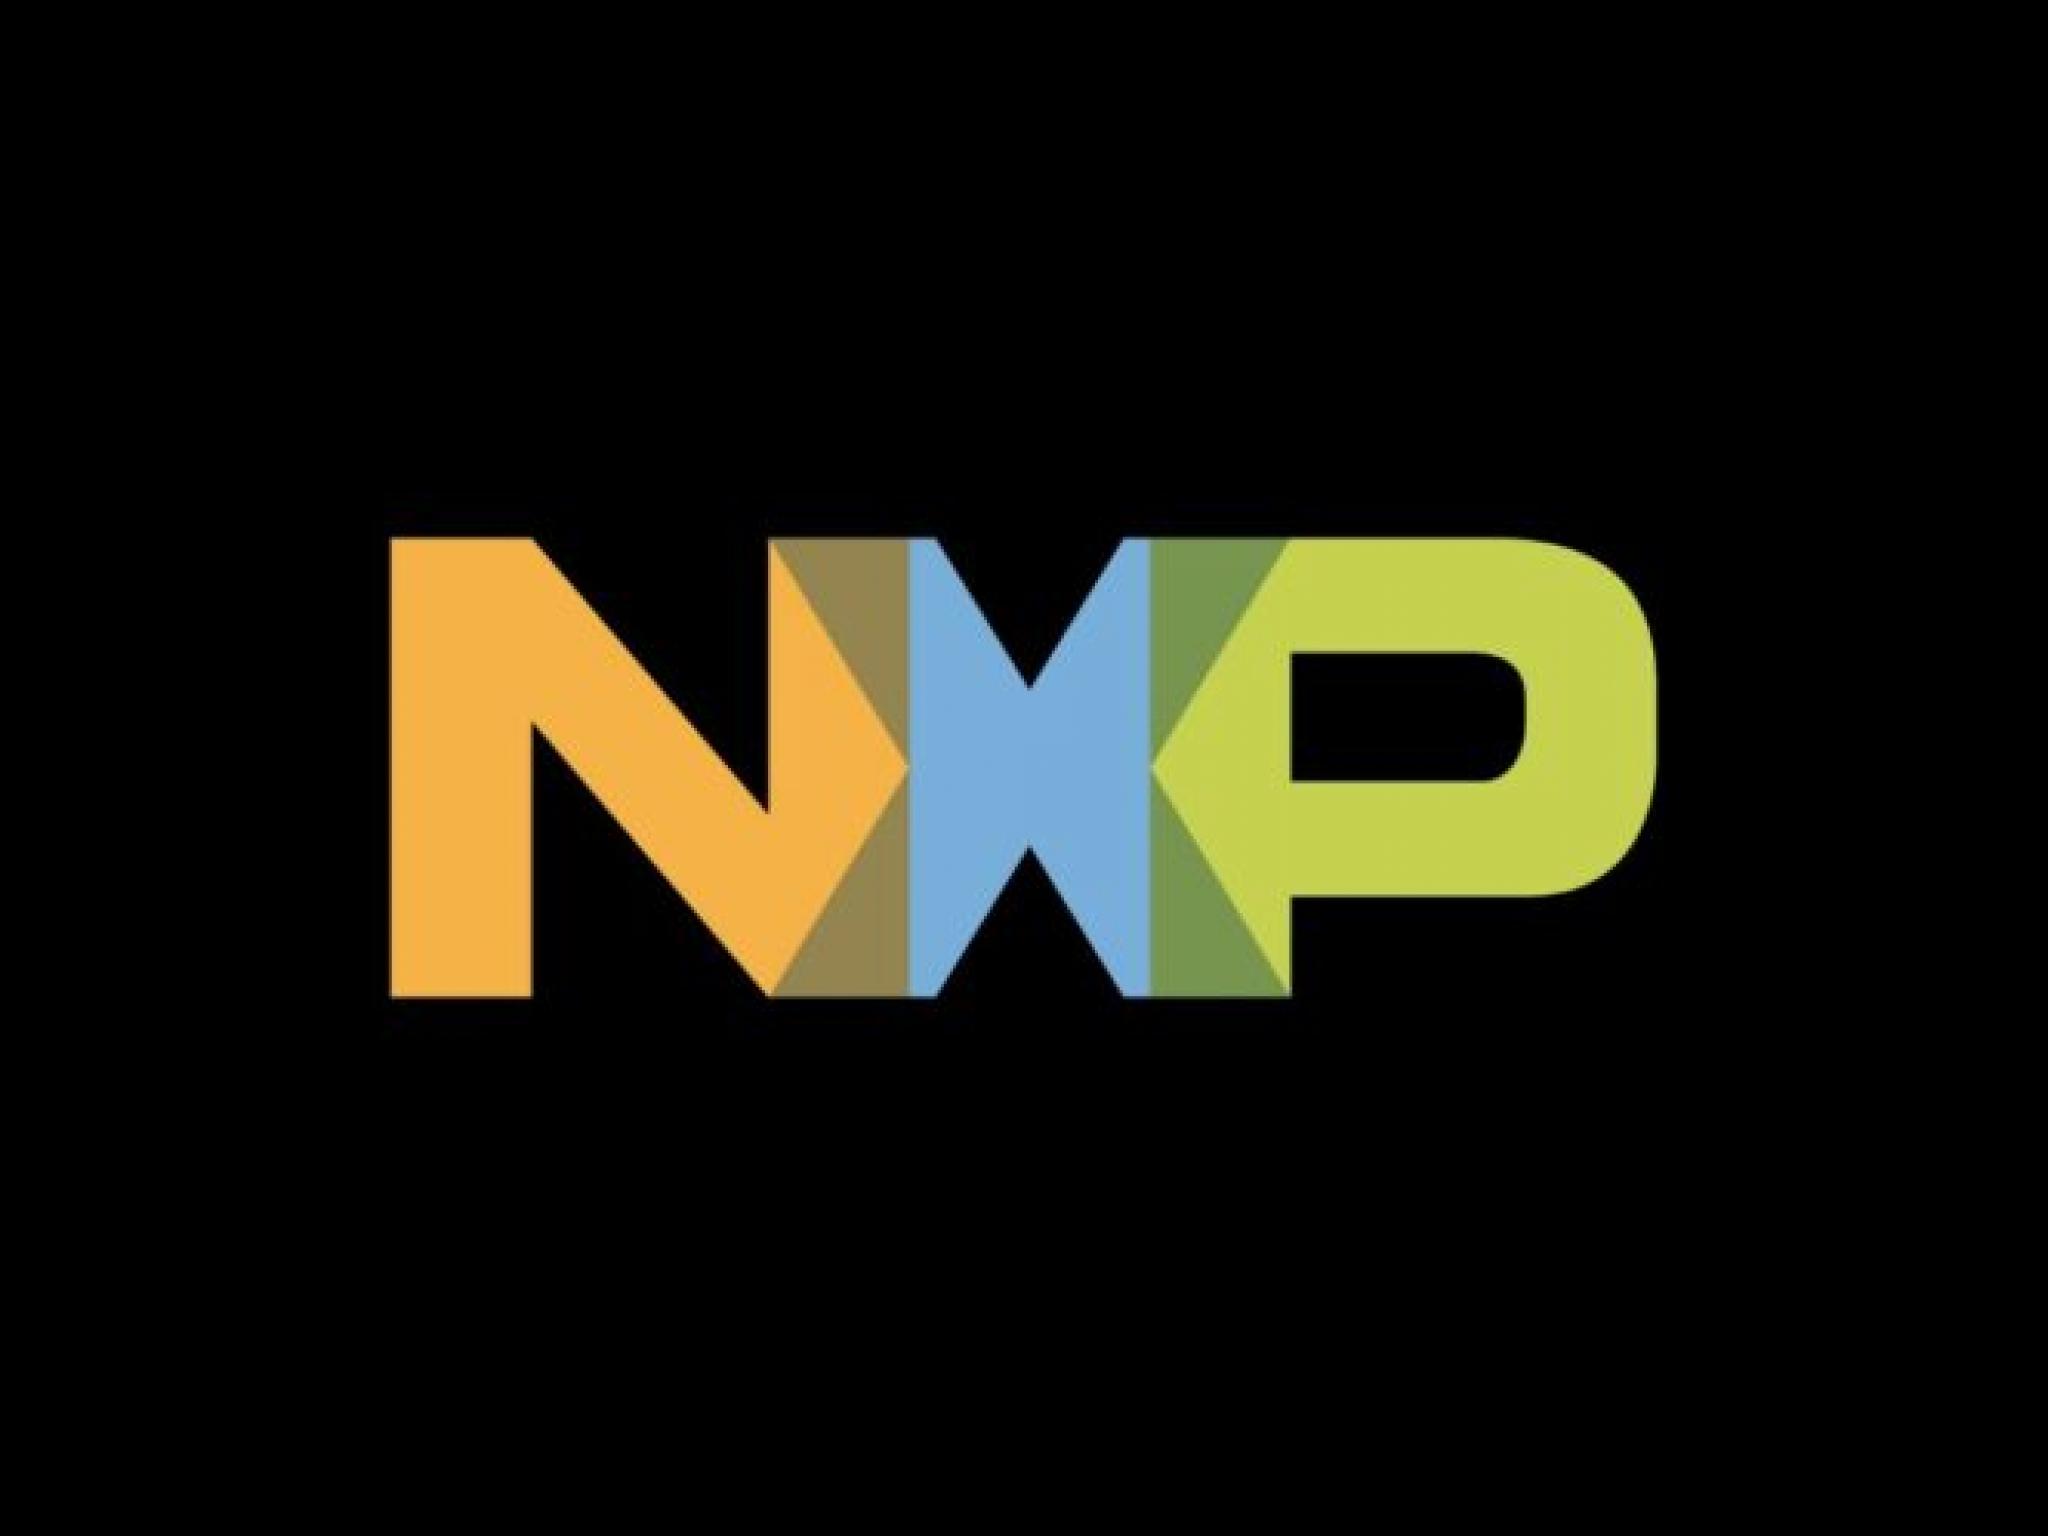  nxp-semi-stock-is-a-buy-on-weakness-most-attractive-analog-name-in-space-analyst 